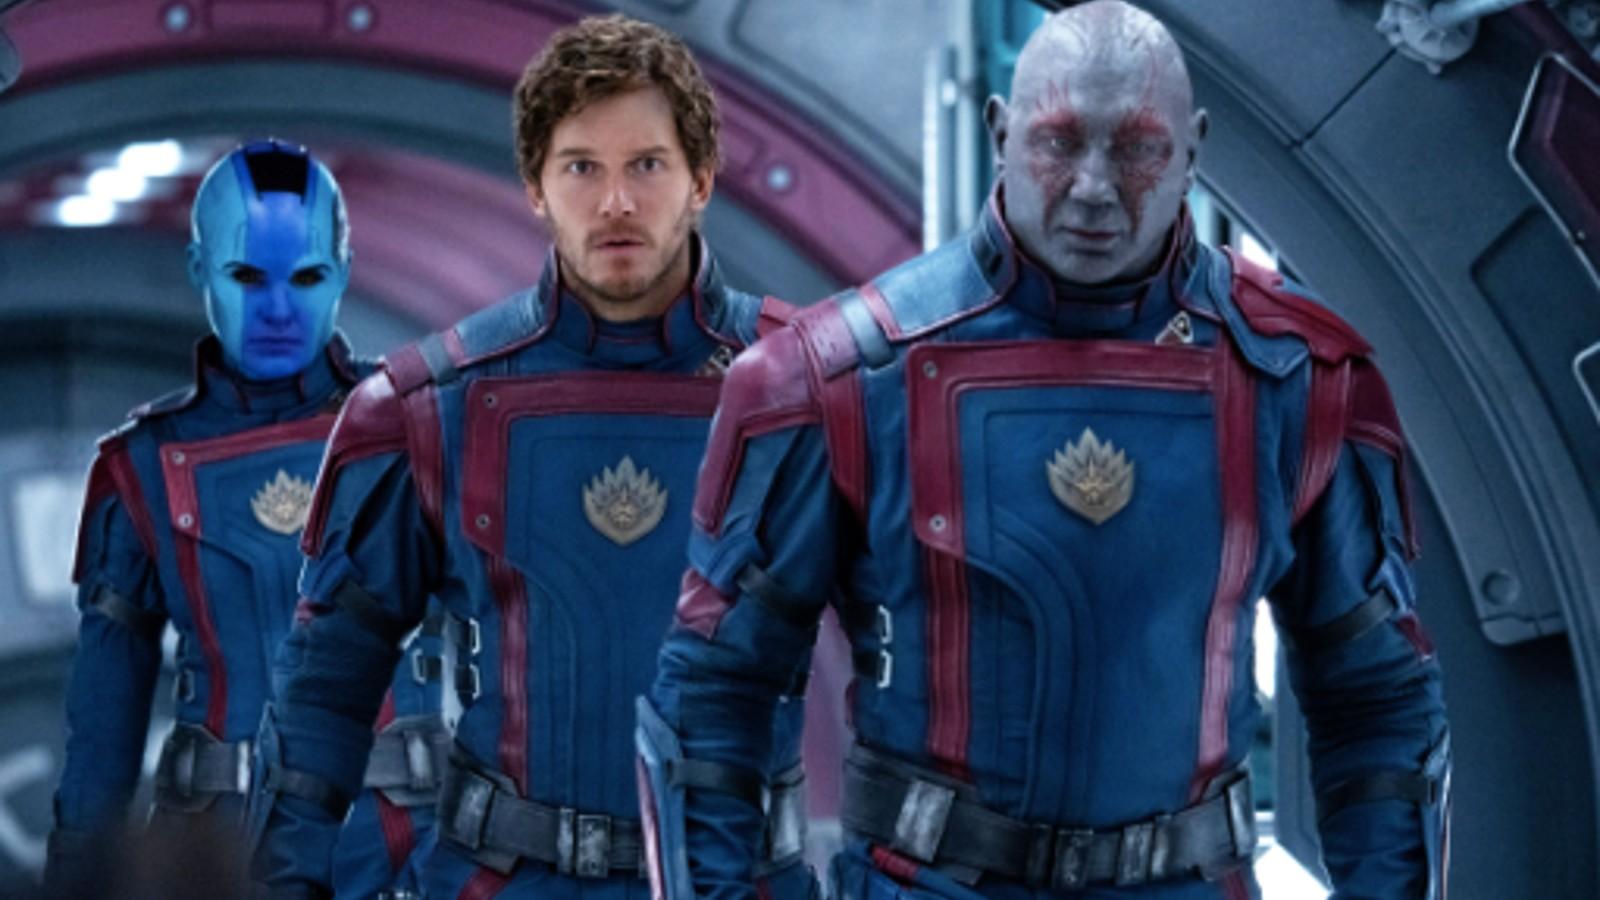 Nebula, Peter Quill, and Drax in Guardians of the Galaxy 3